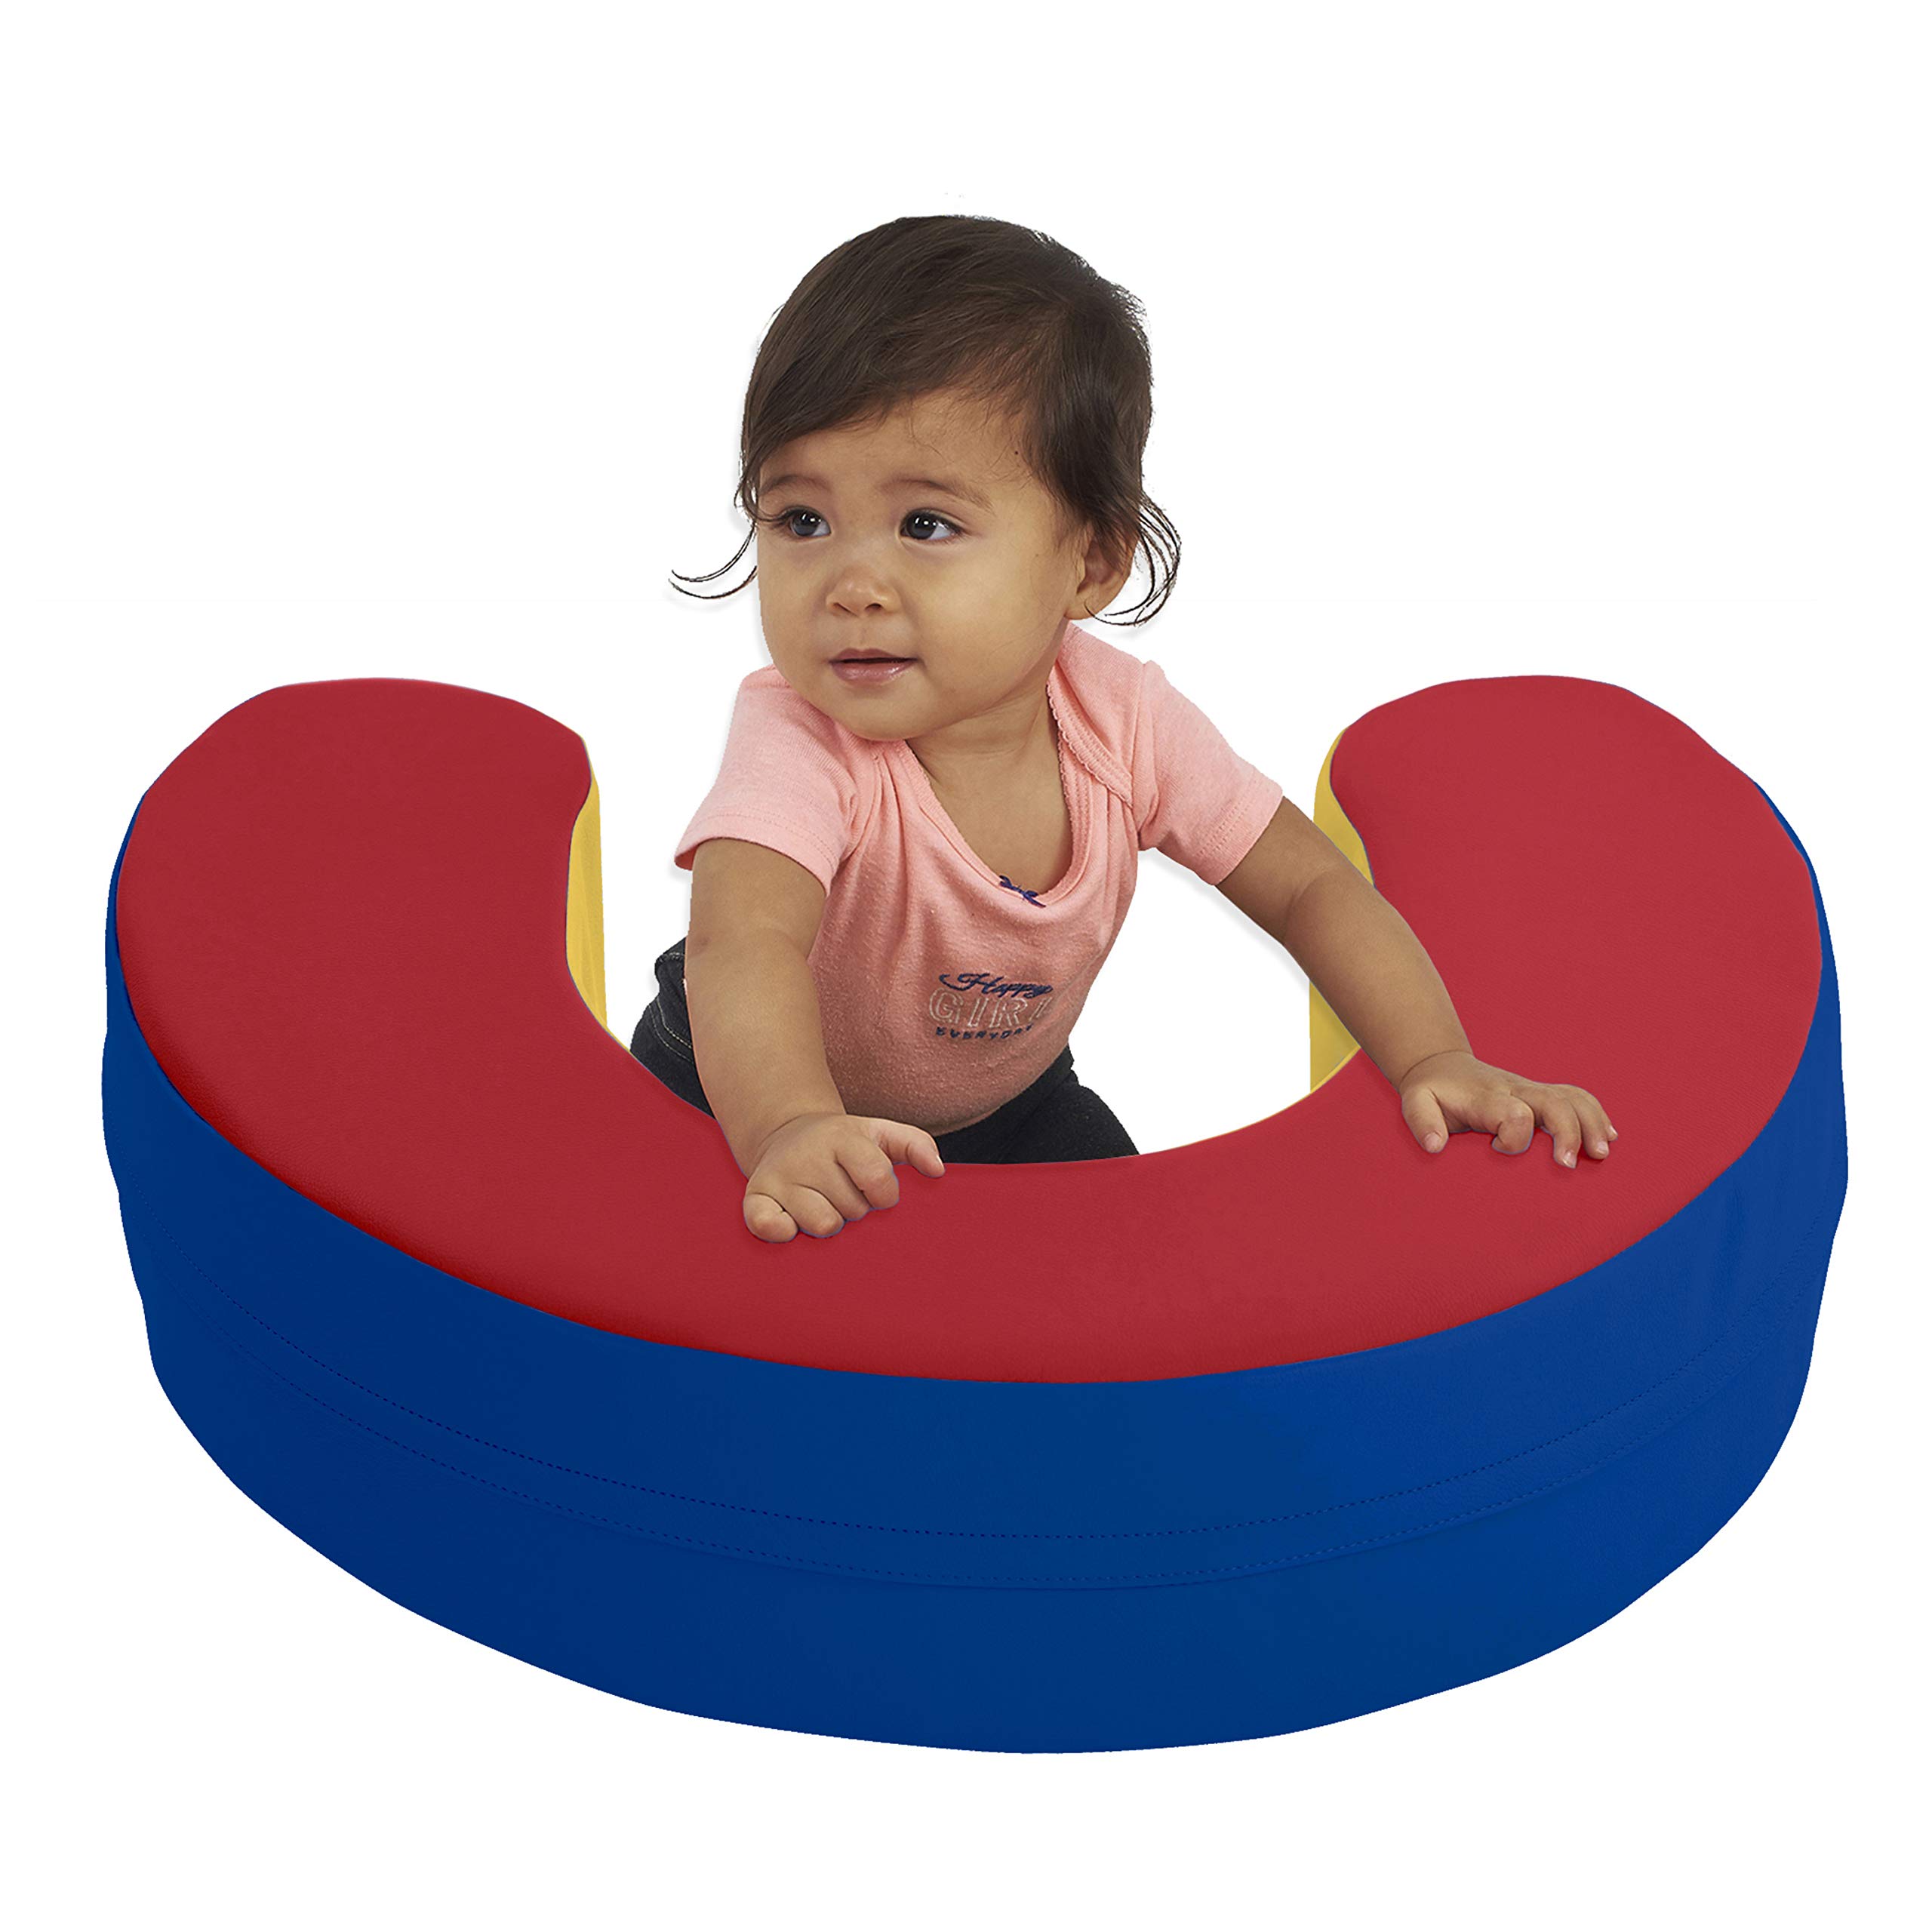 Factory Direct Partners 10423-AS SoftScape Sit and Support Ring for Babies and Infants, Soft Cushioned Foam Floor Seat with Non-Slip Bottom for Nursey, Playroom, Daycare - Assorted